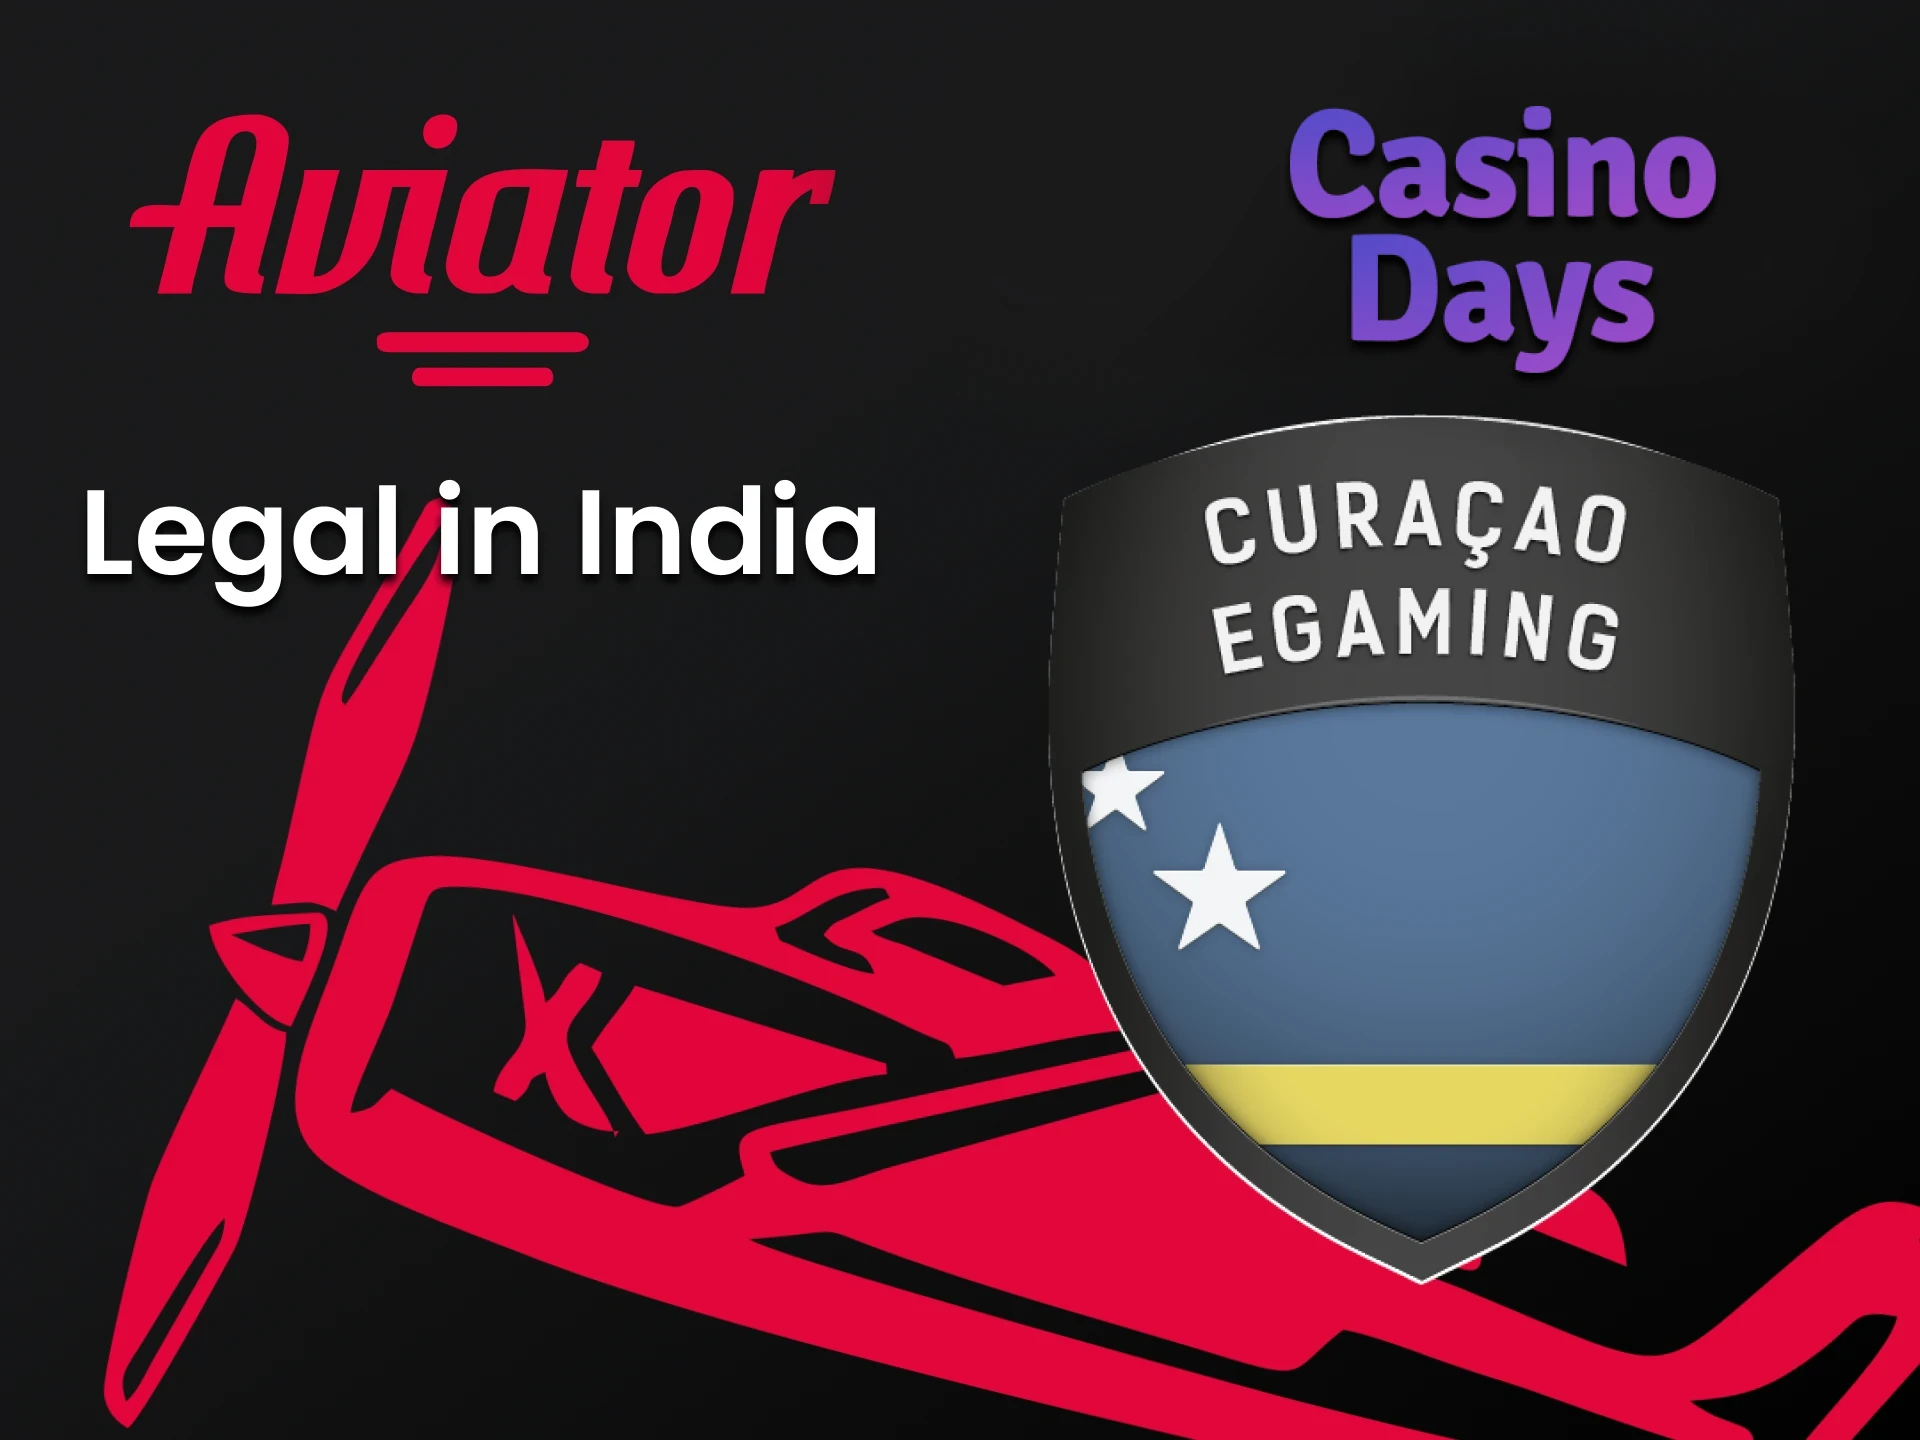 Casino Days is legal in India to play Aviator.